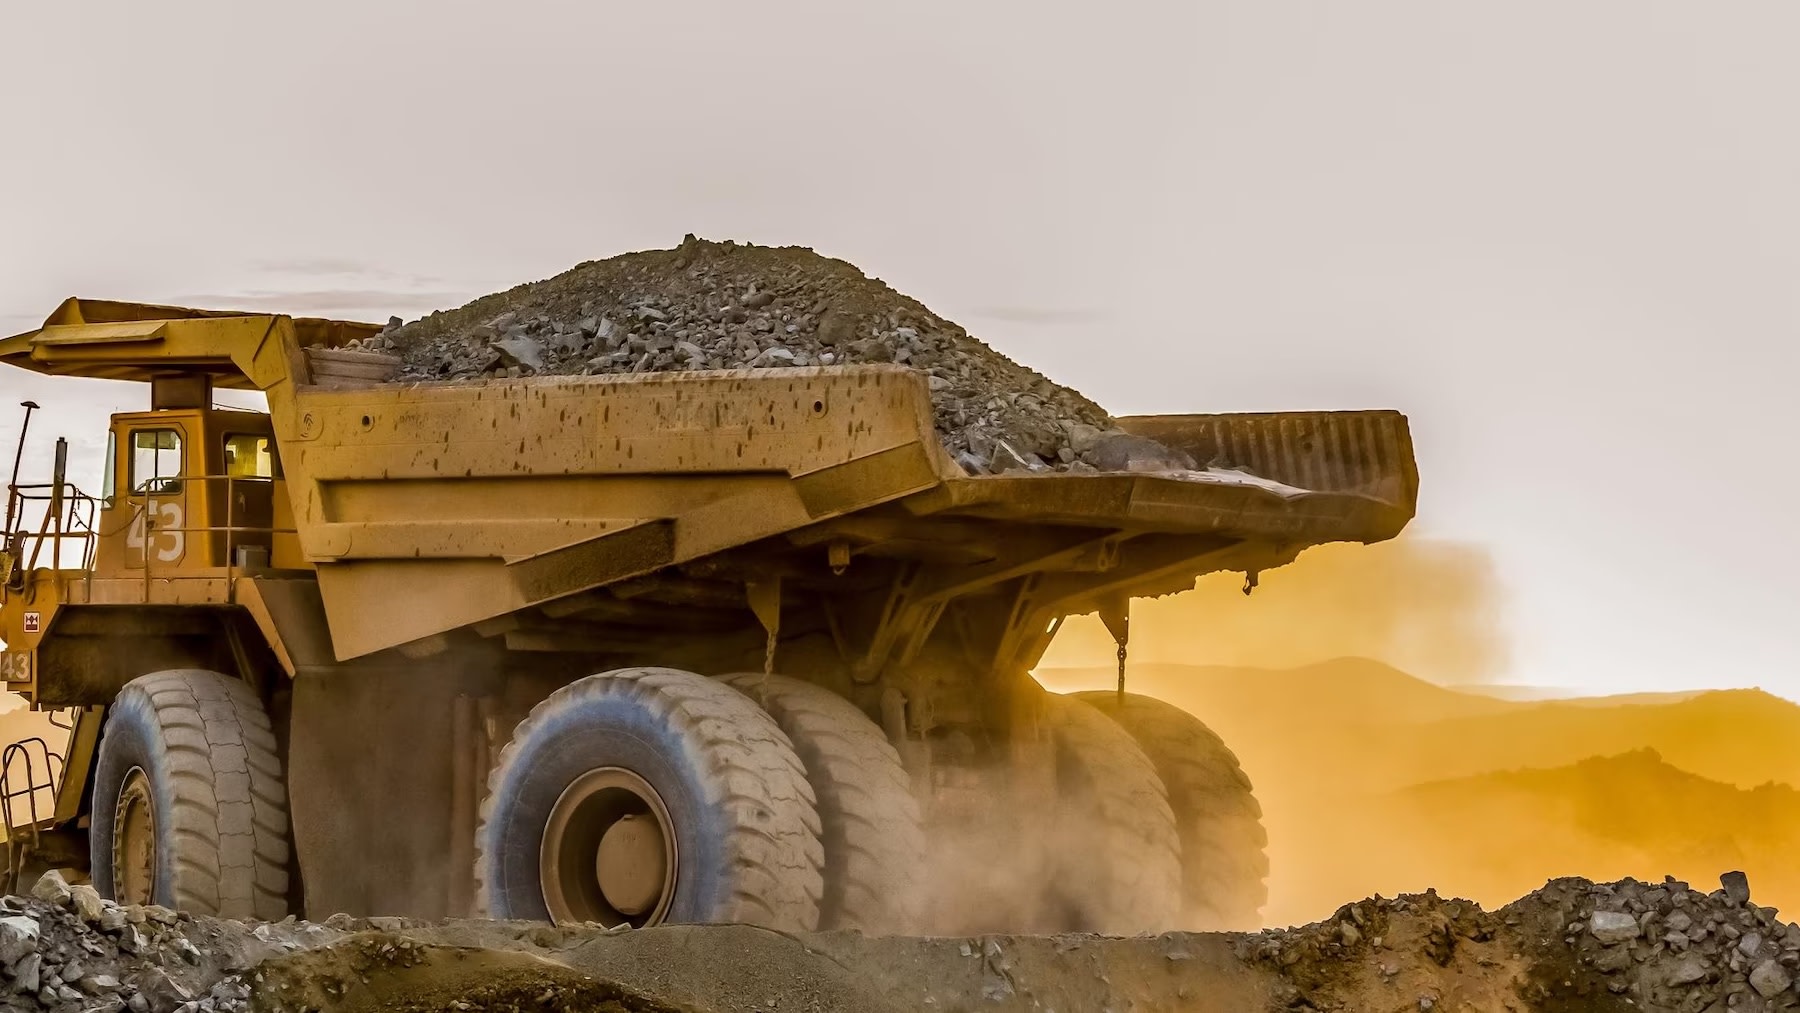 Image of mining truck carrying mineral ore in Africa